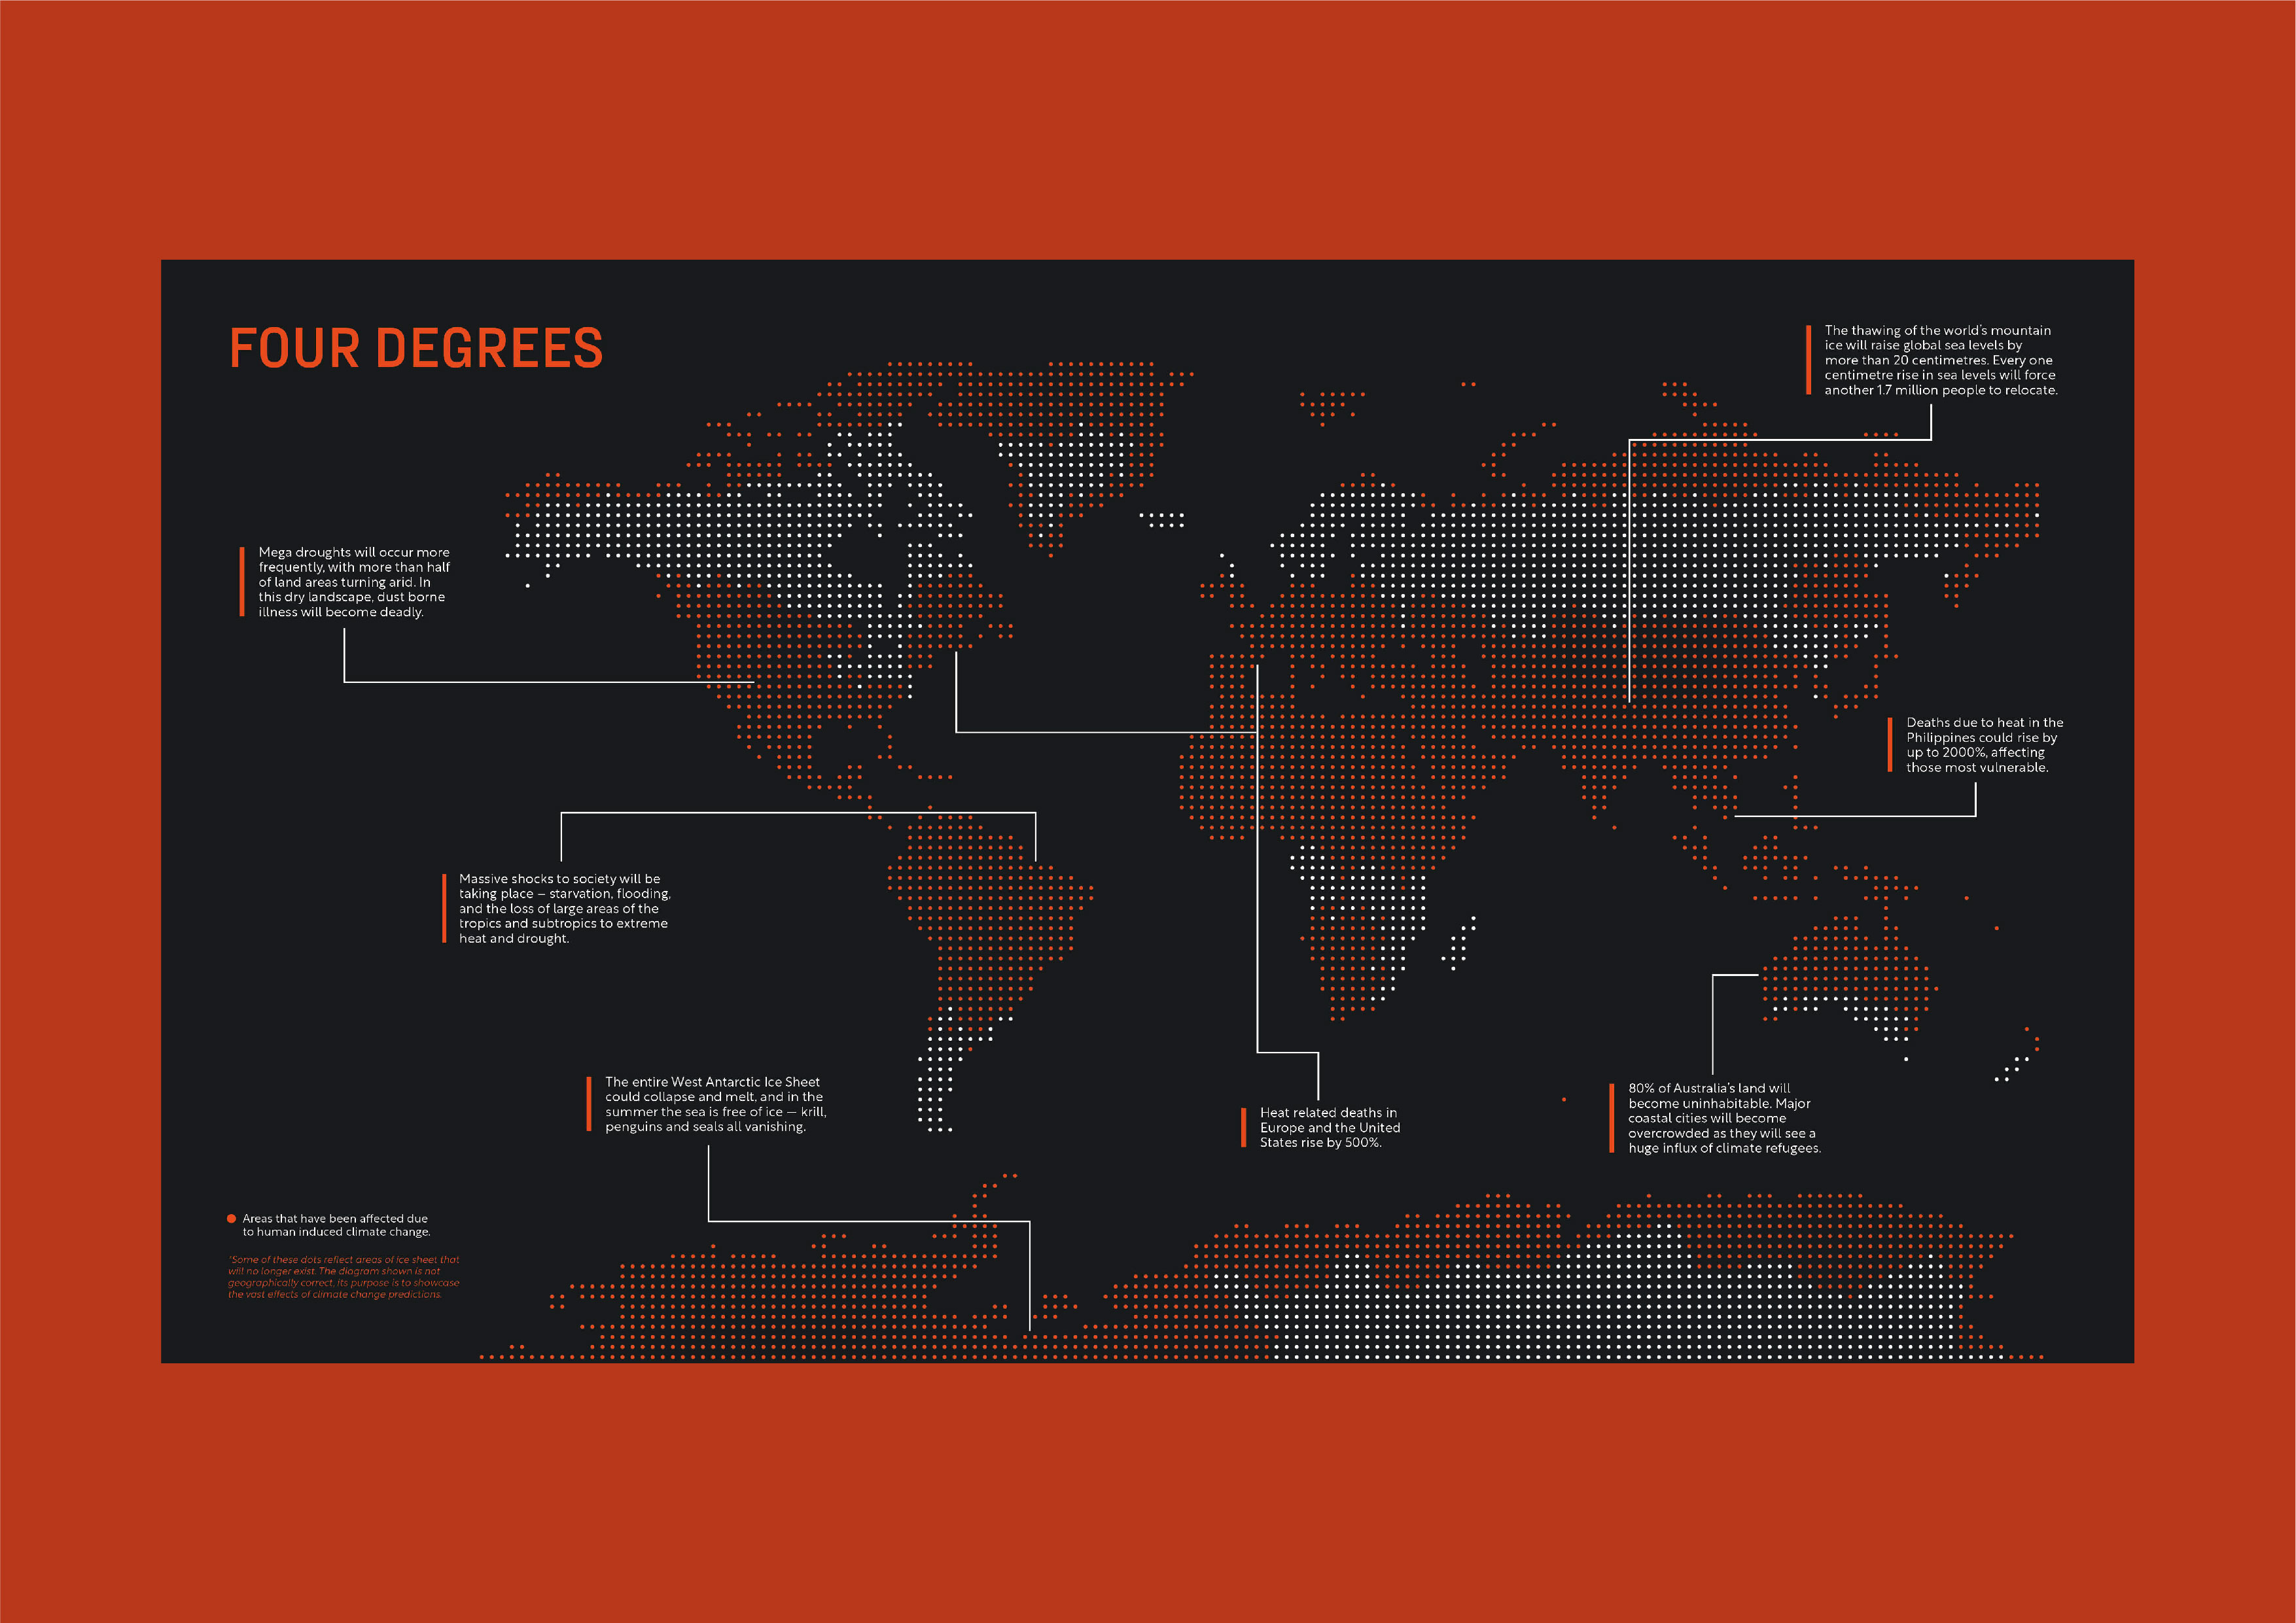 BA Design for Publishing work by Emily Shields showing an infographic of a world map.